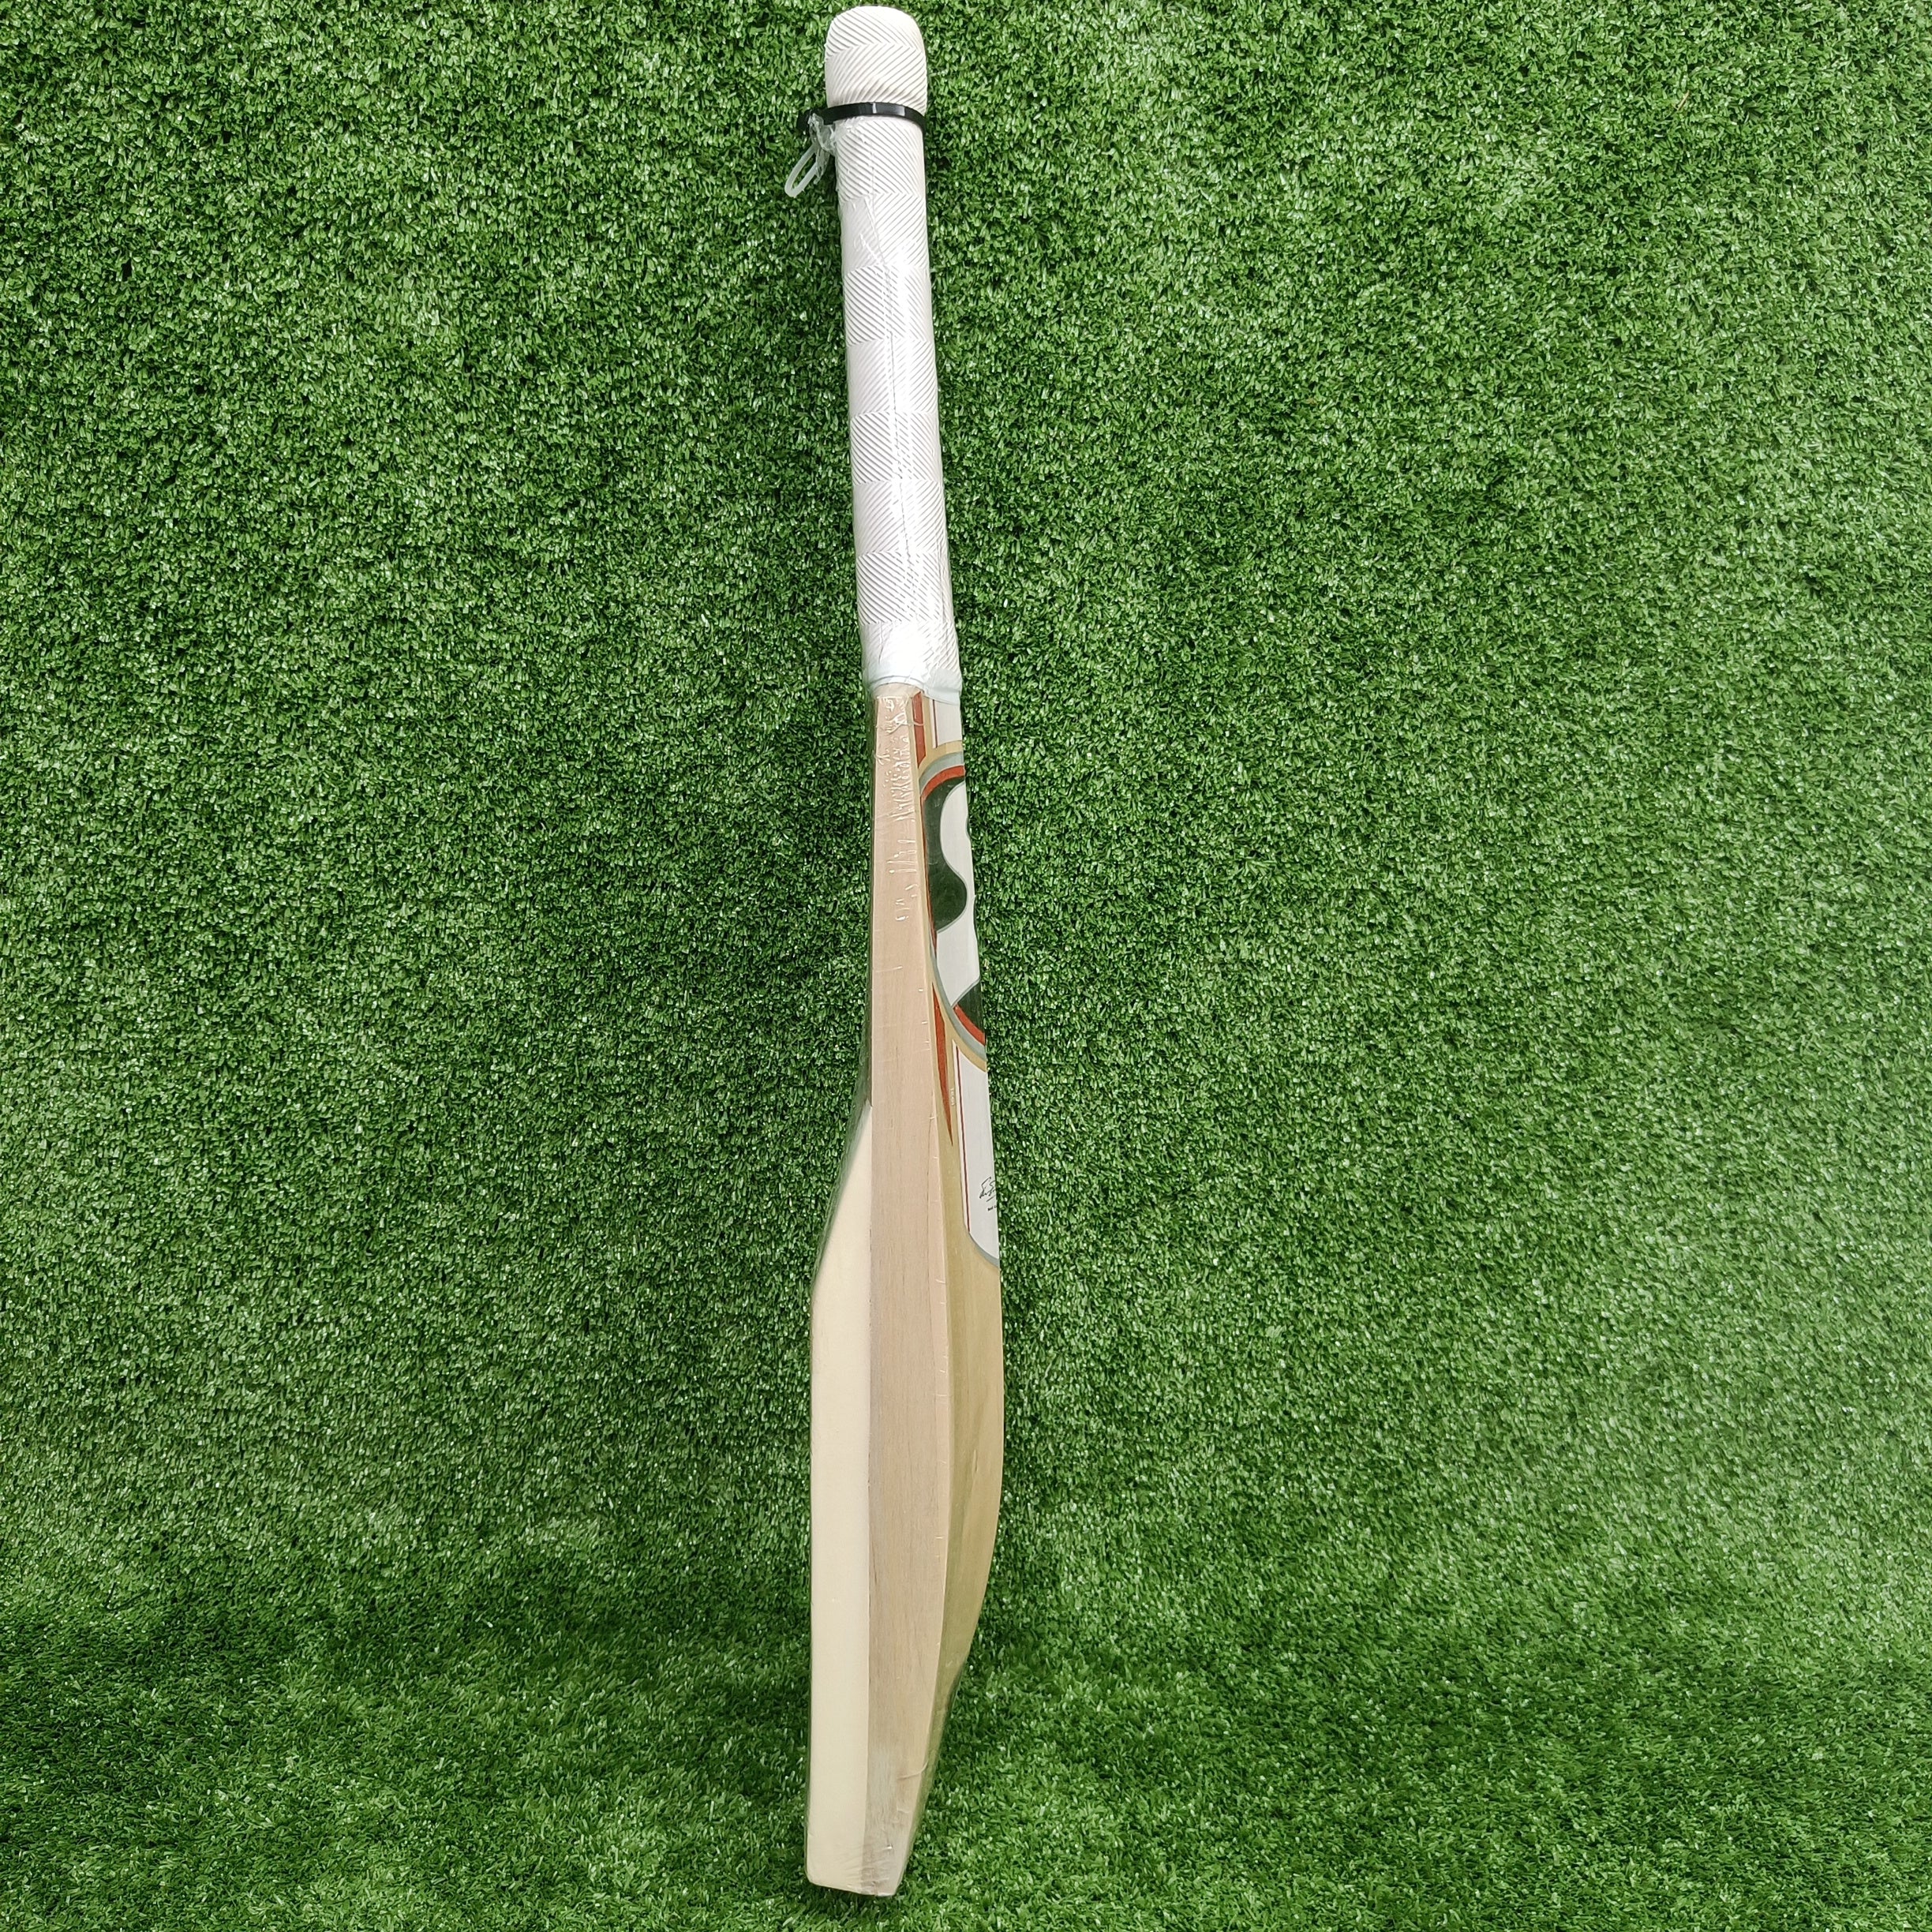 SG Catch Bat (For Catching Practice)